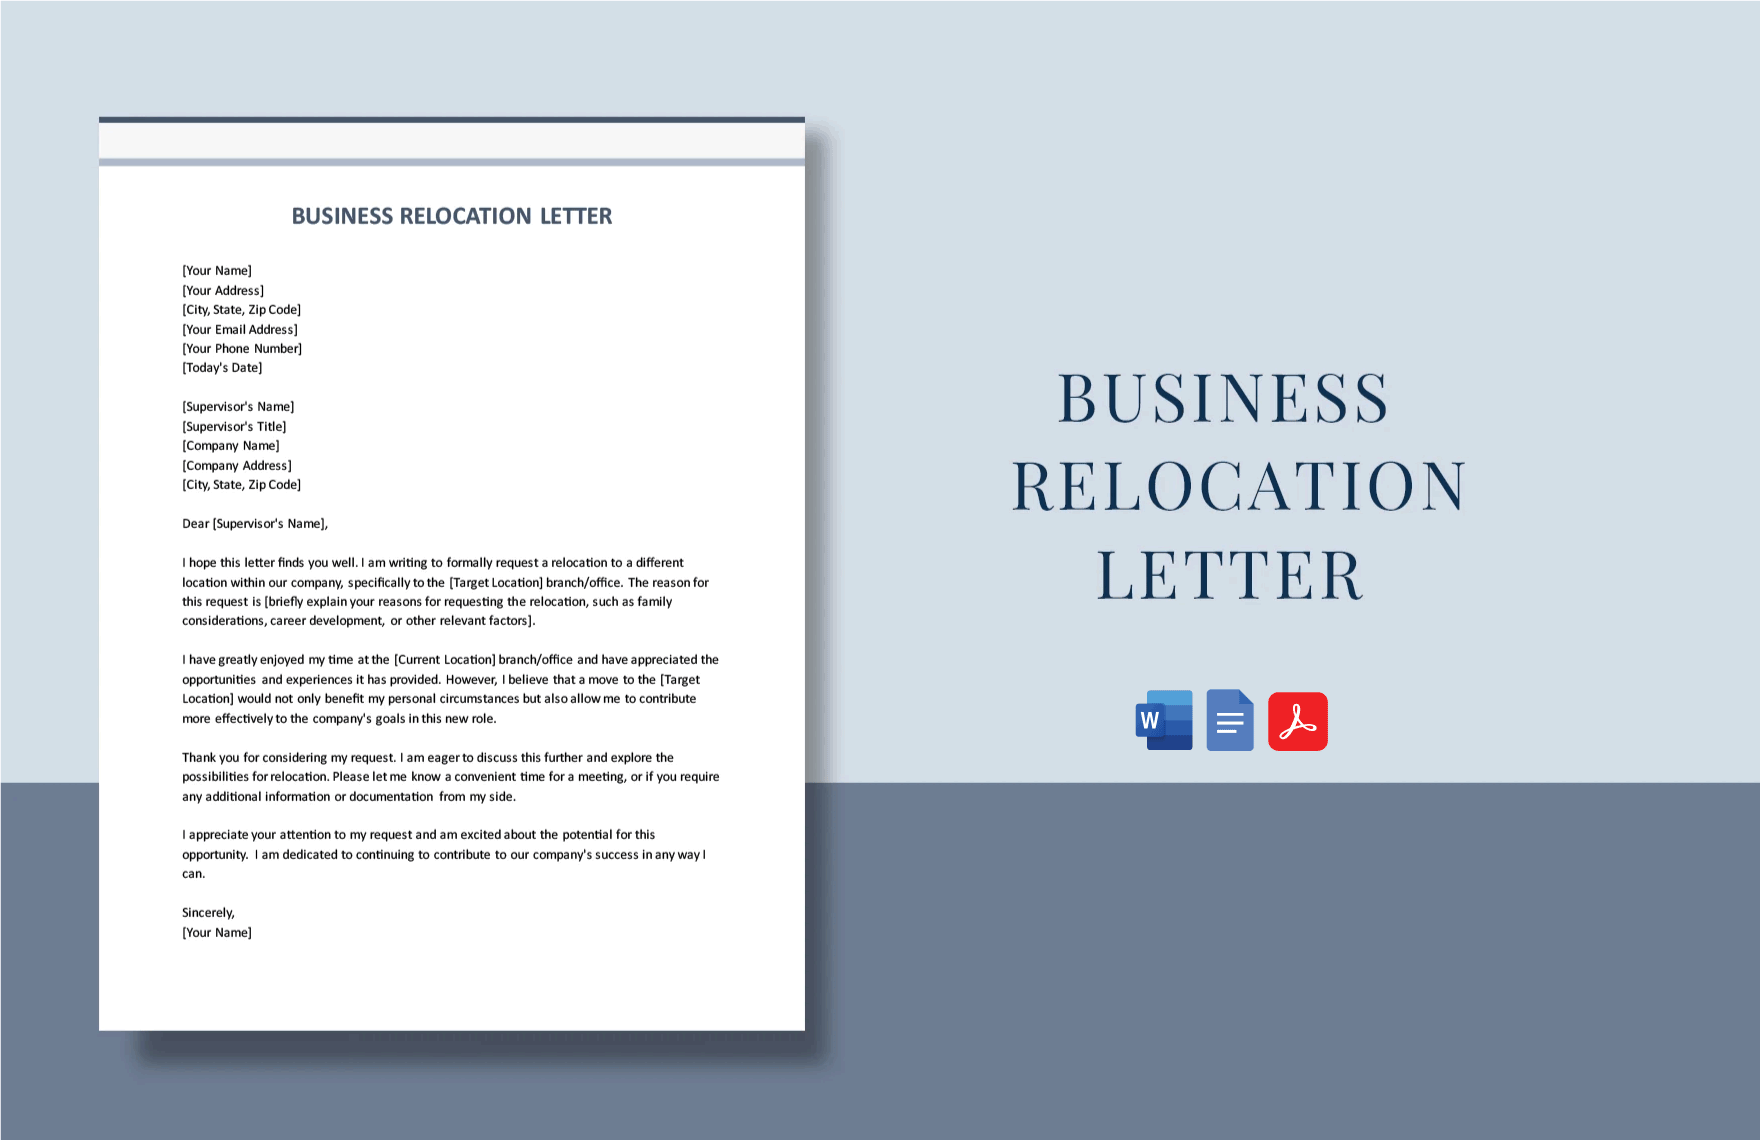 Business Relocation Letter